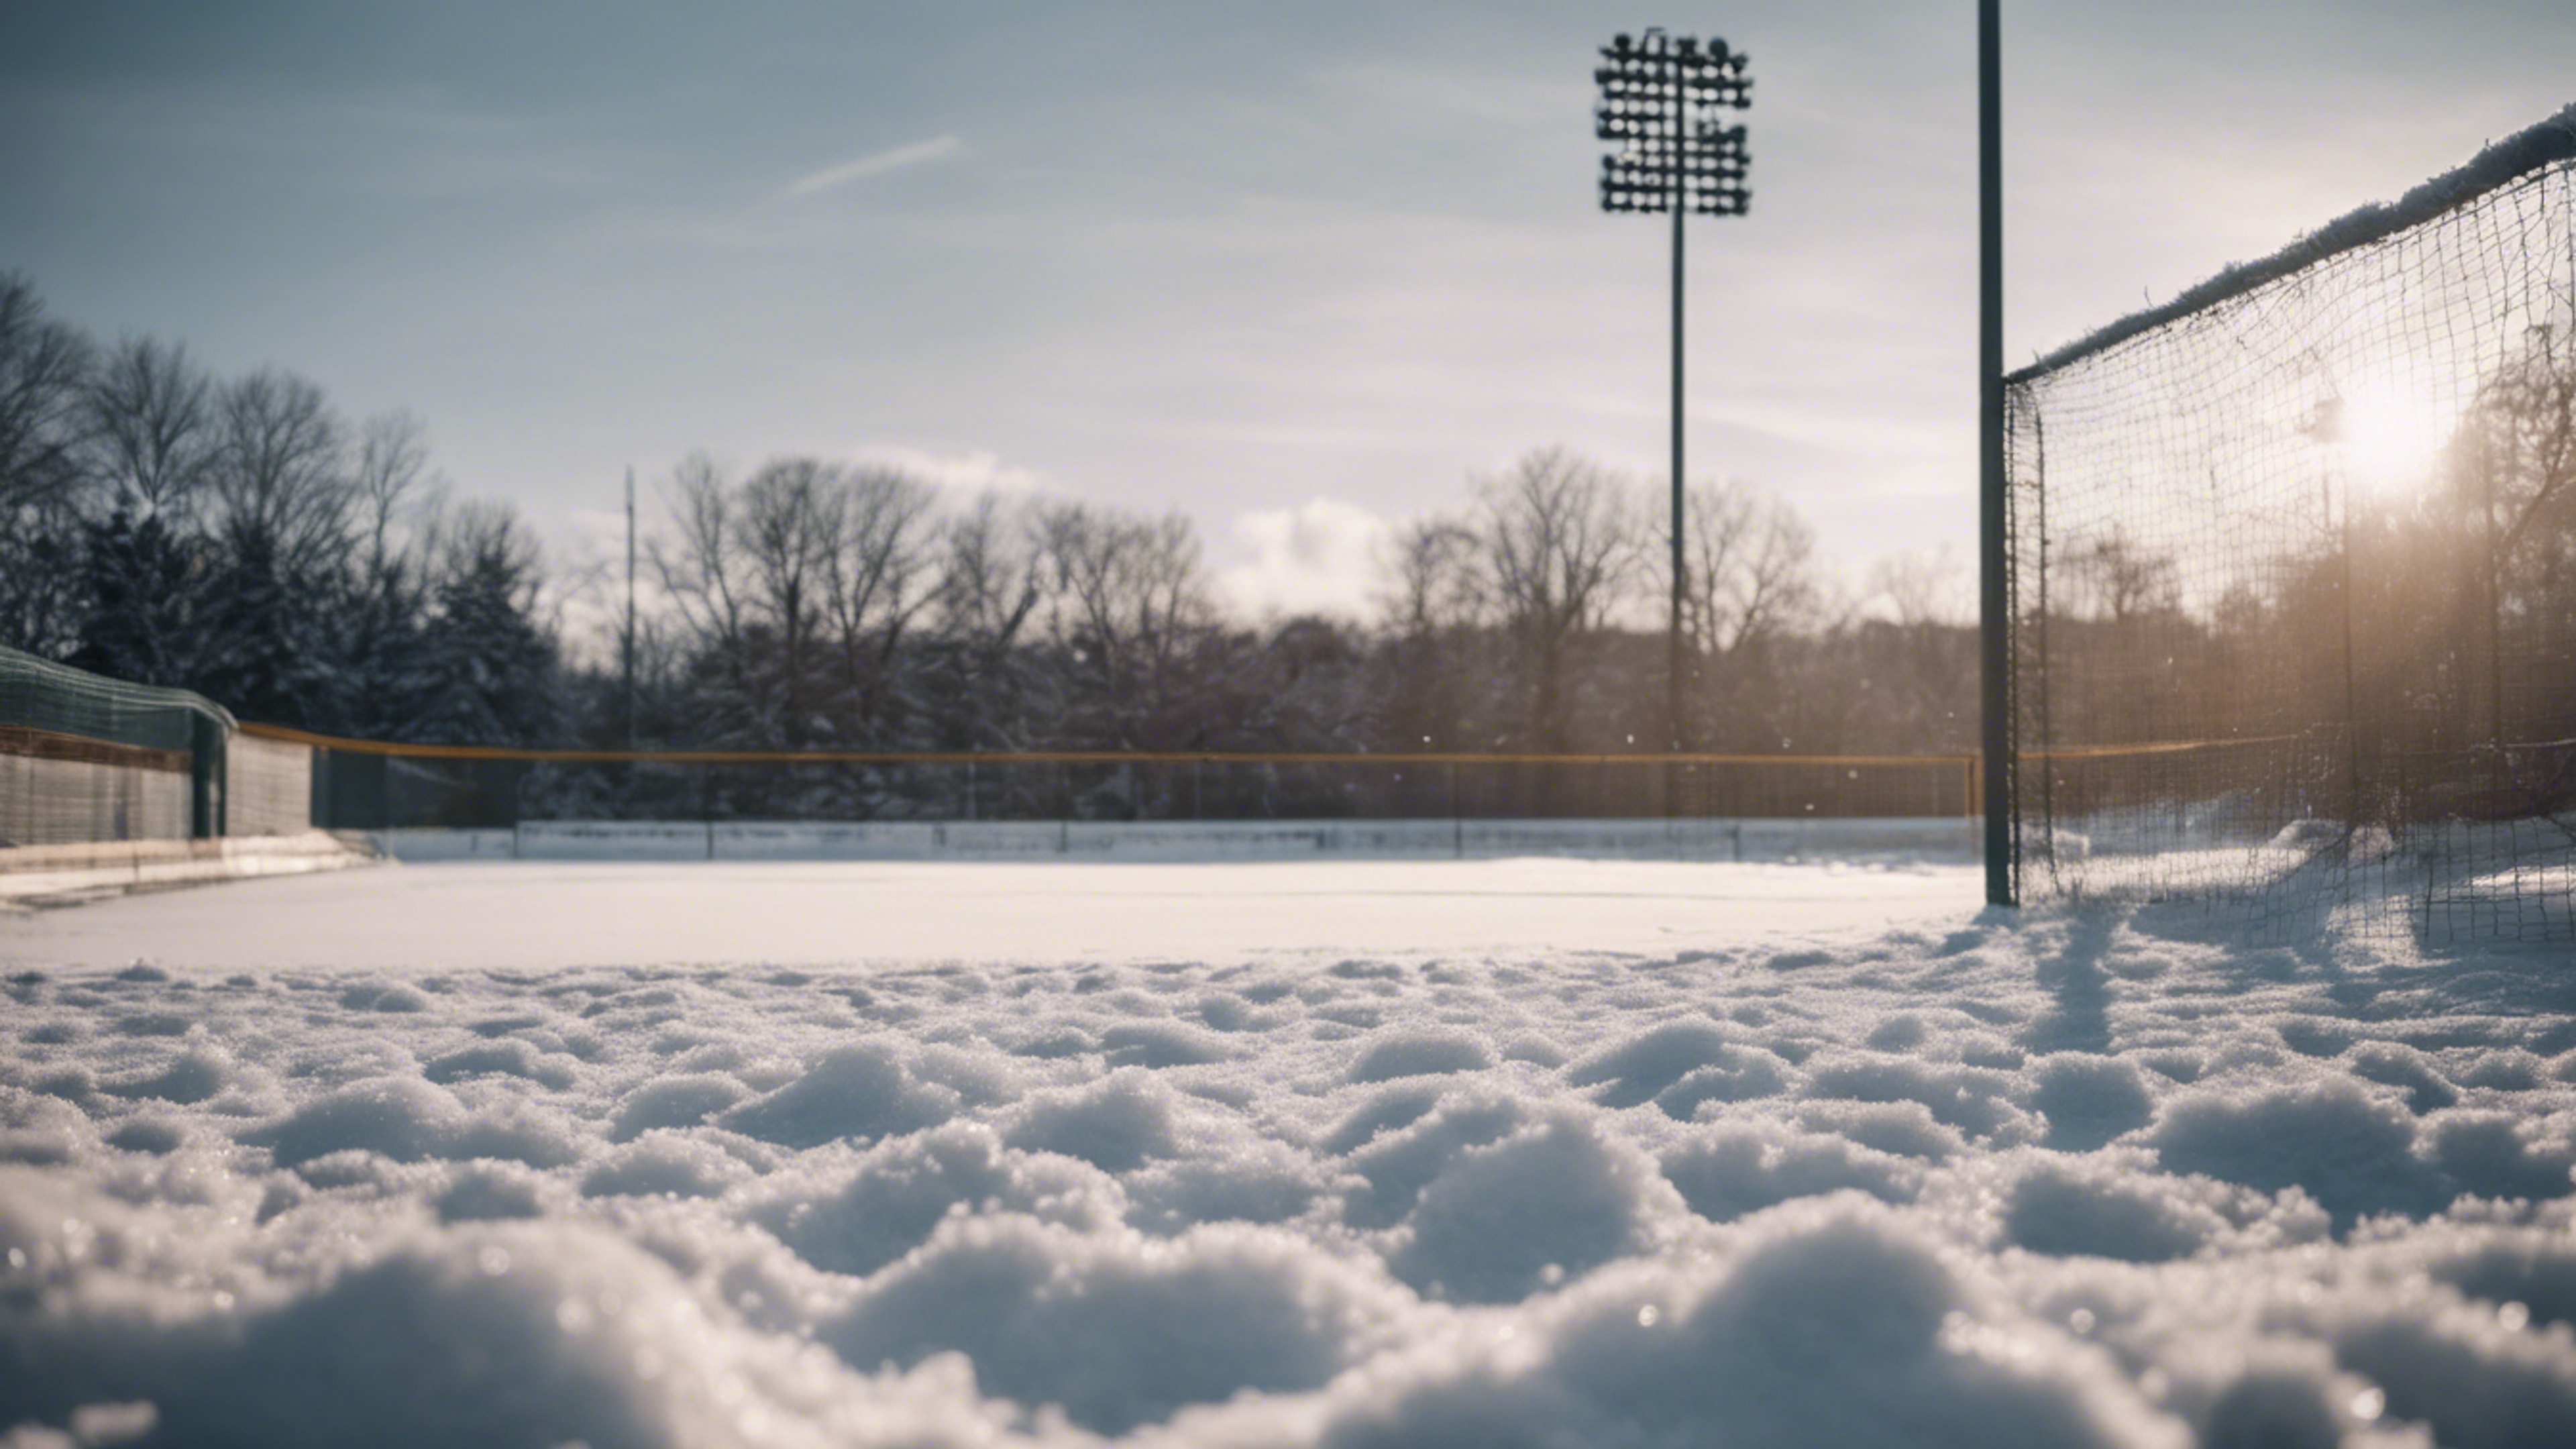 A baseball field covered in a thin layer of snow during off-season. Tapet[abf98c57f7b048239f2f]